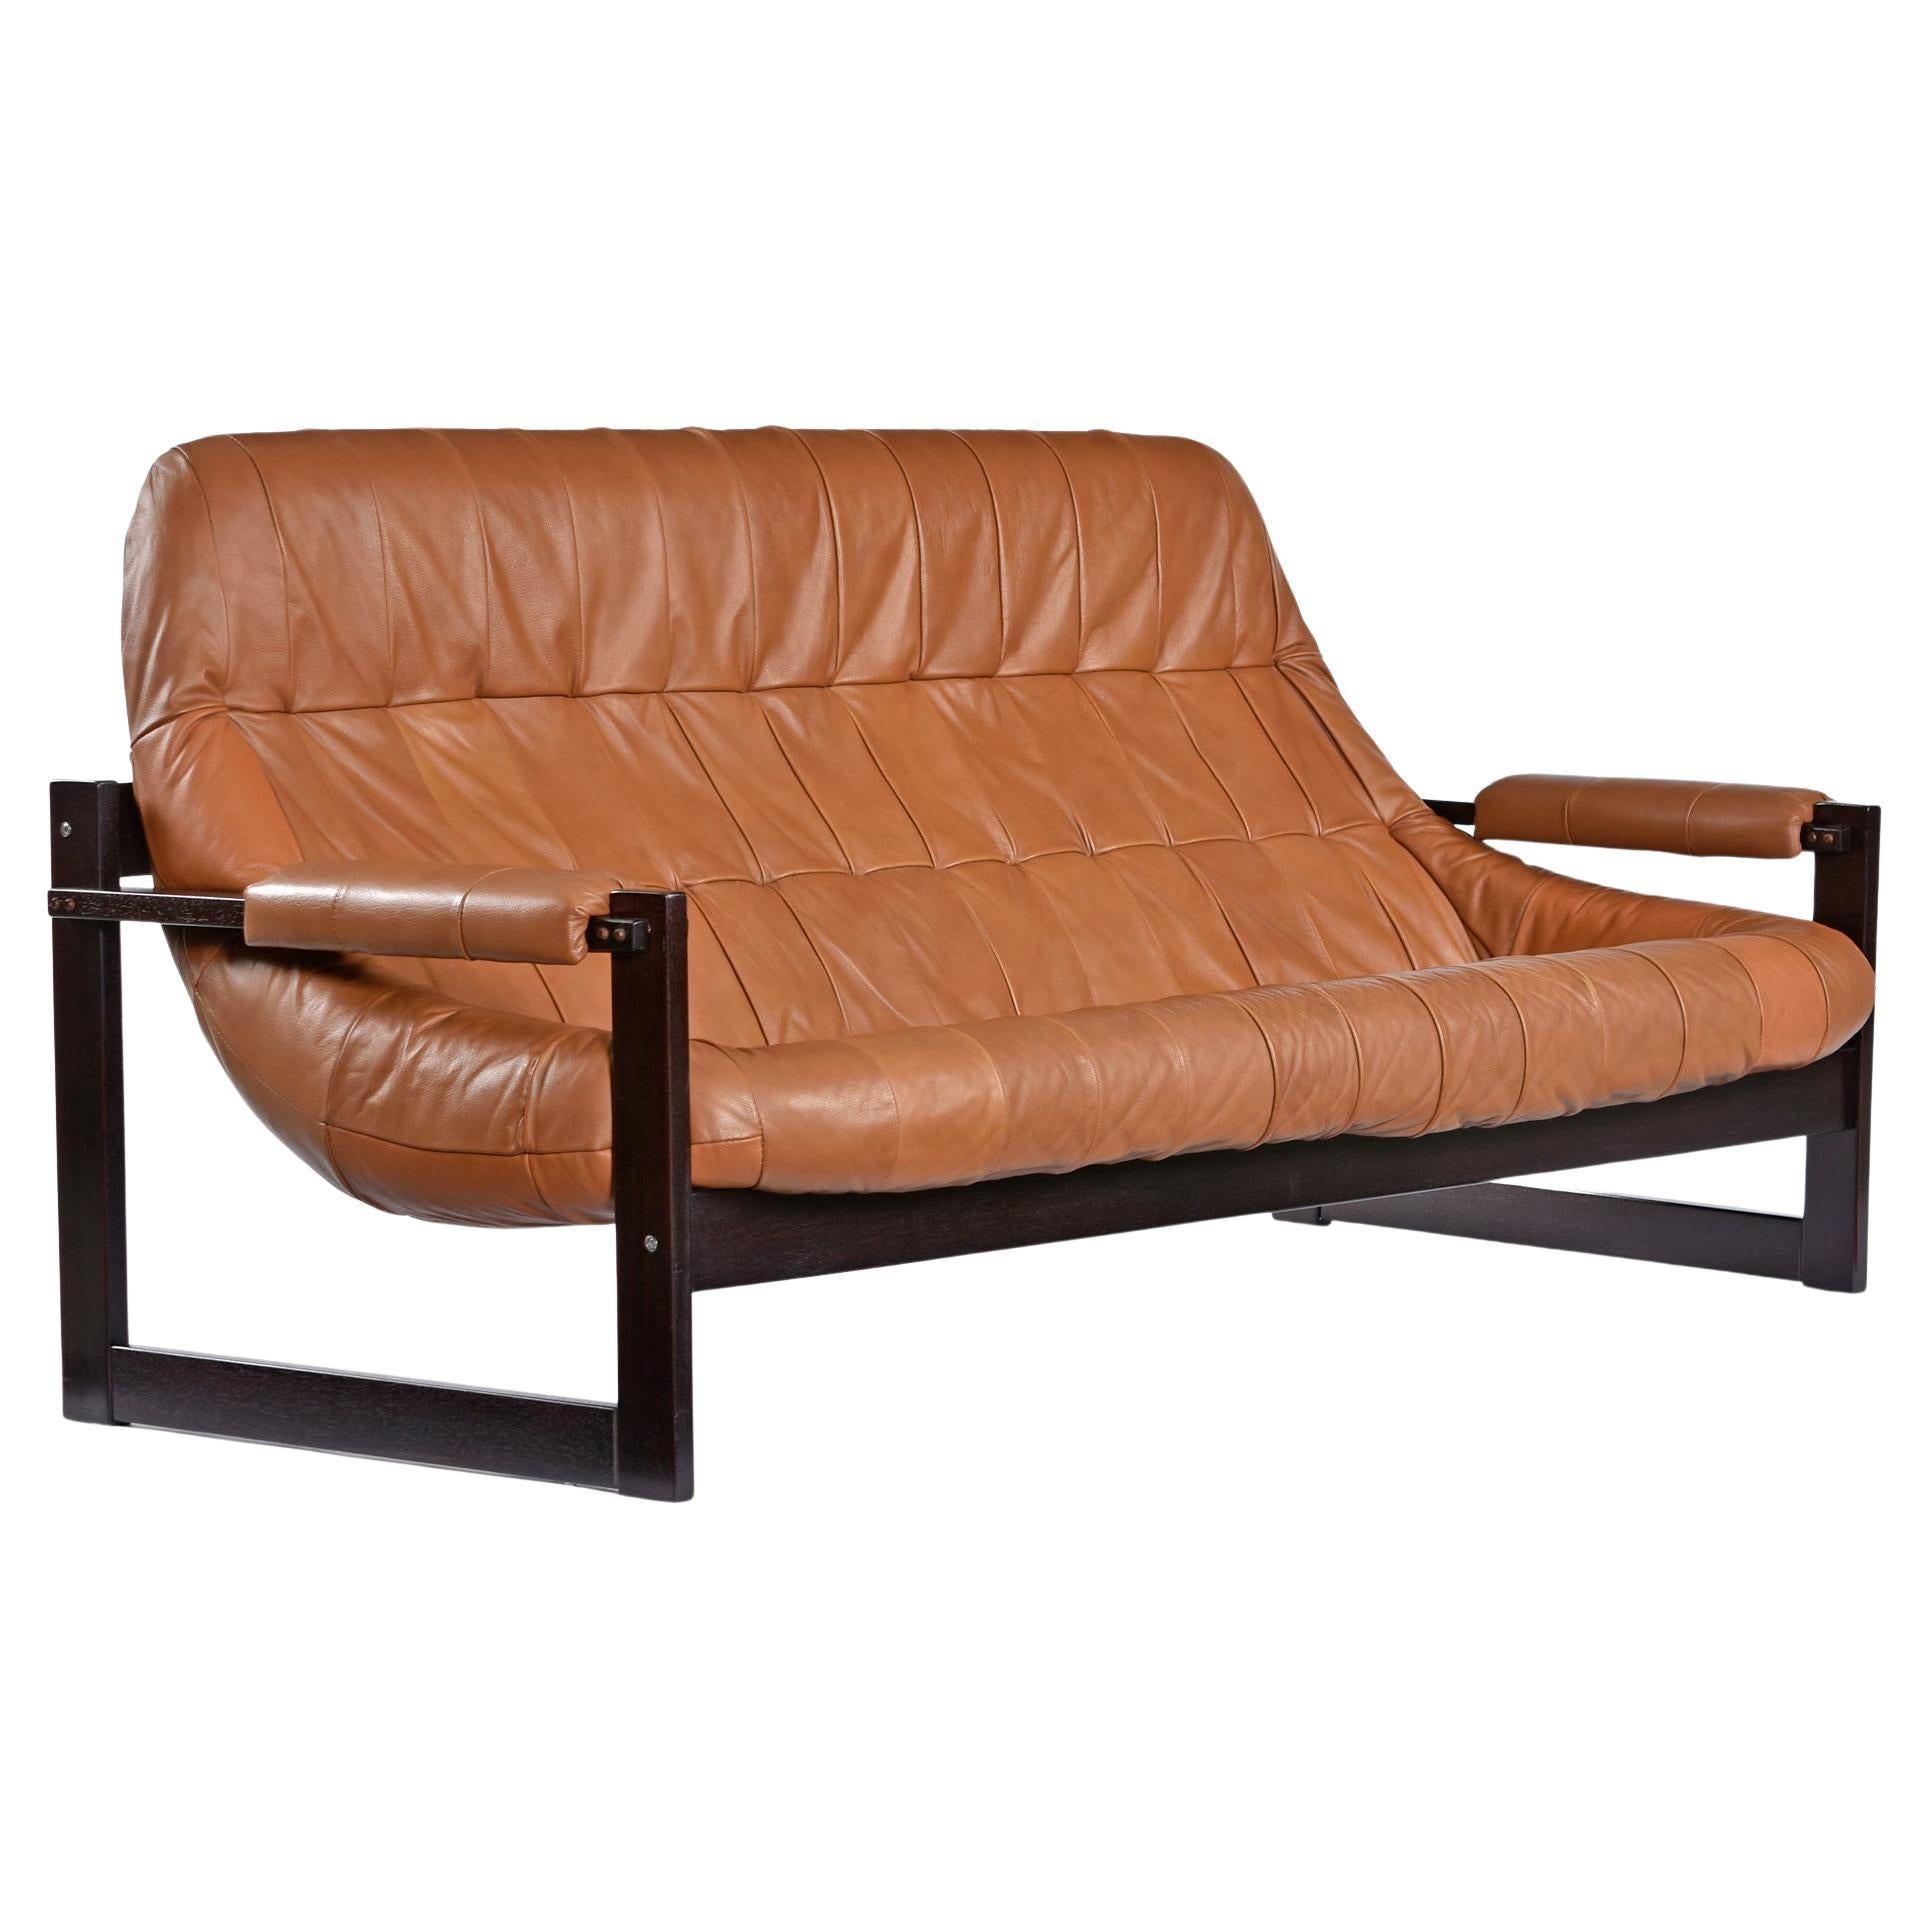 Rosewood & Butterscotch Leather MP-163 "Earth" 3-Seater Sofa by Percival Lafer For Sale